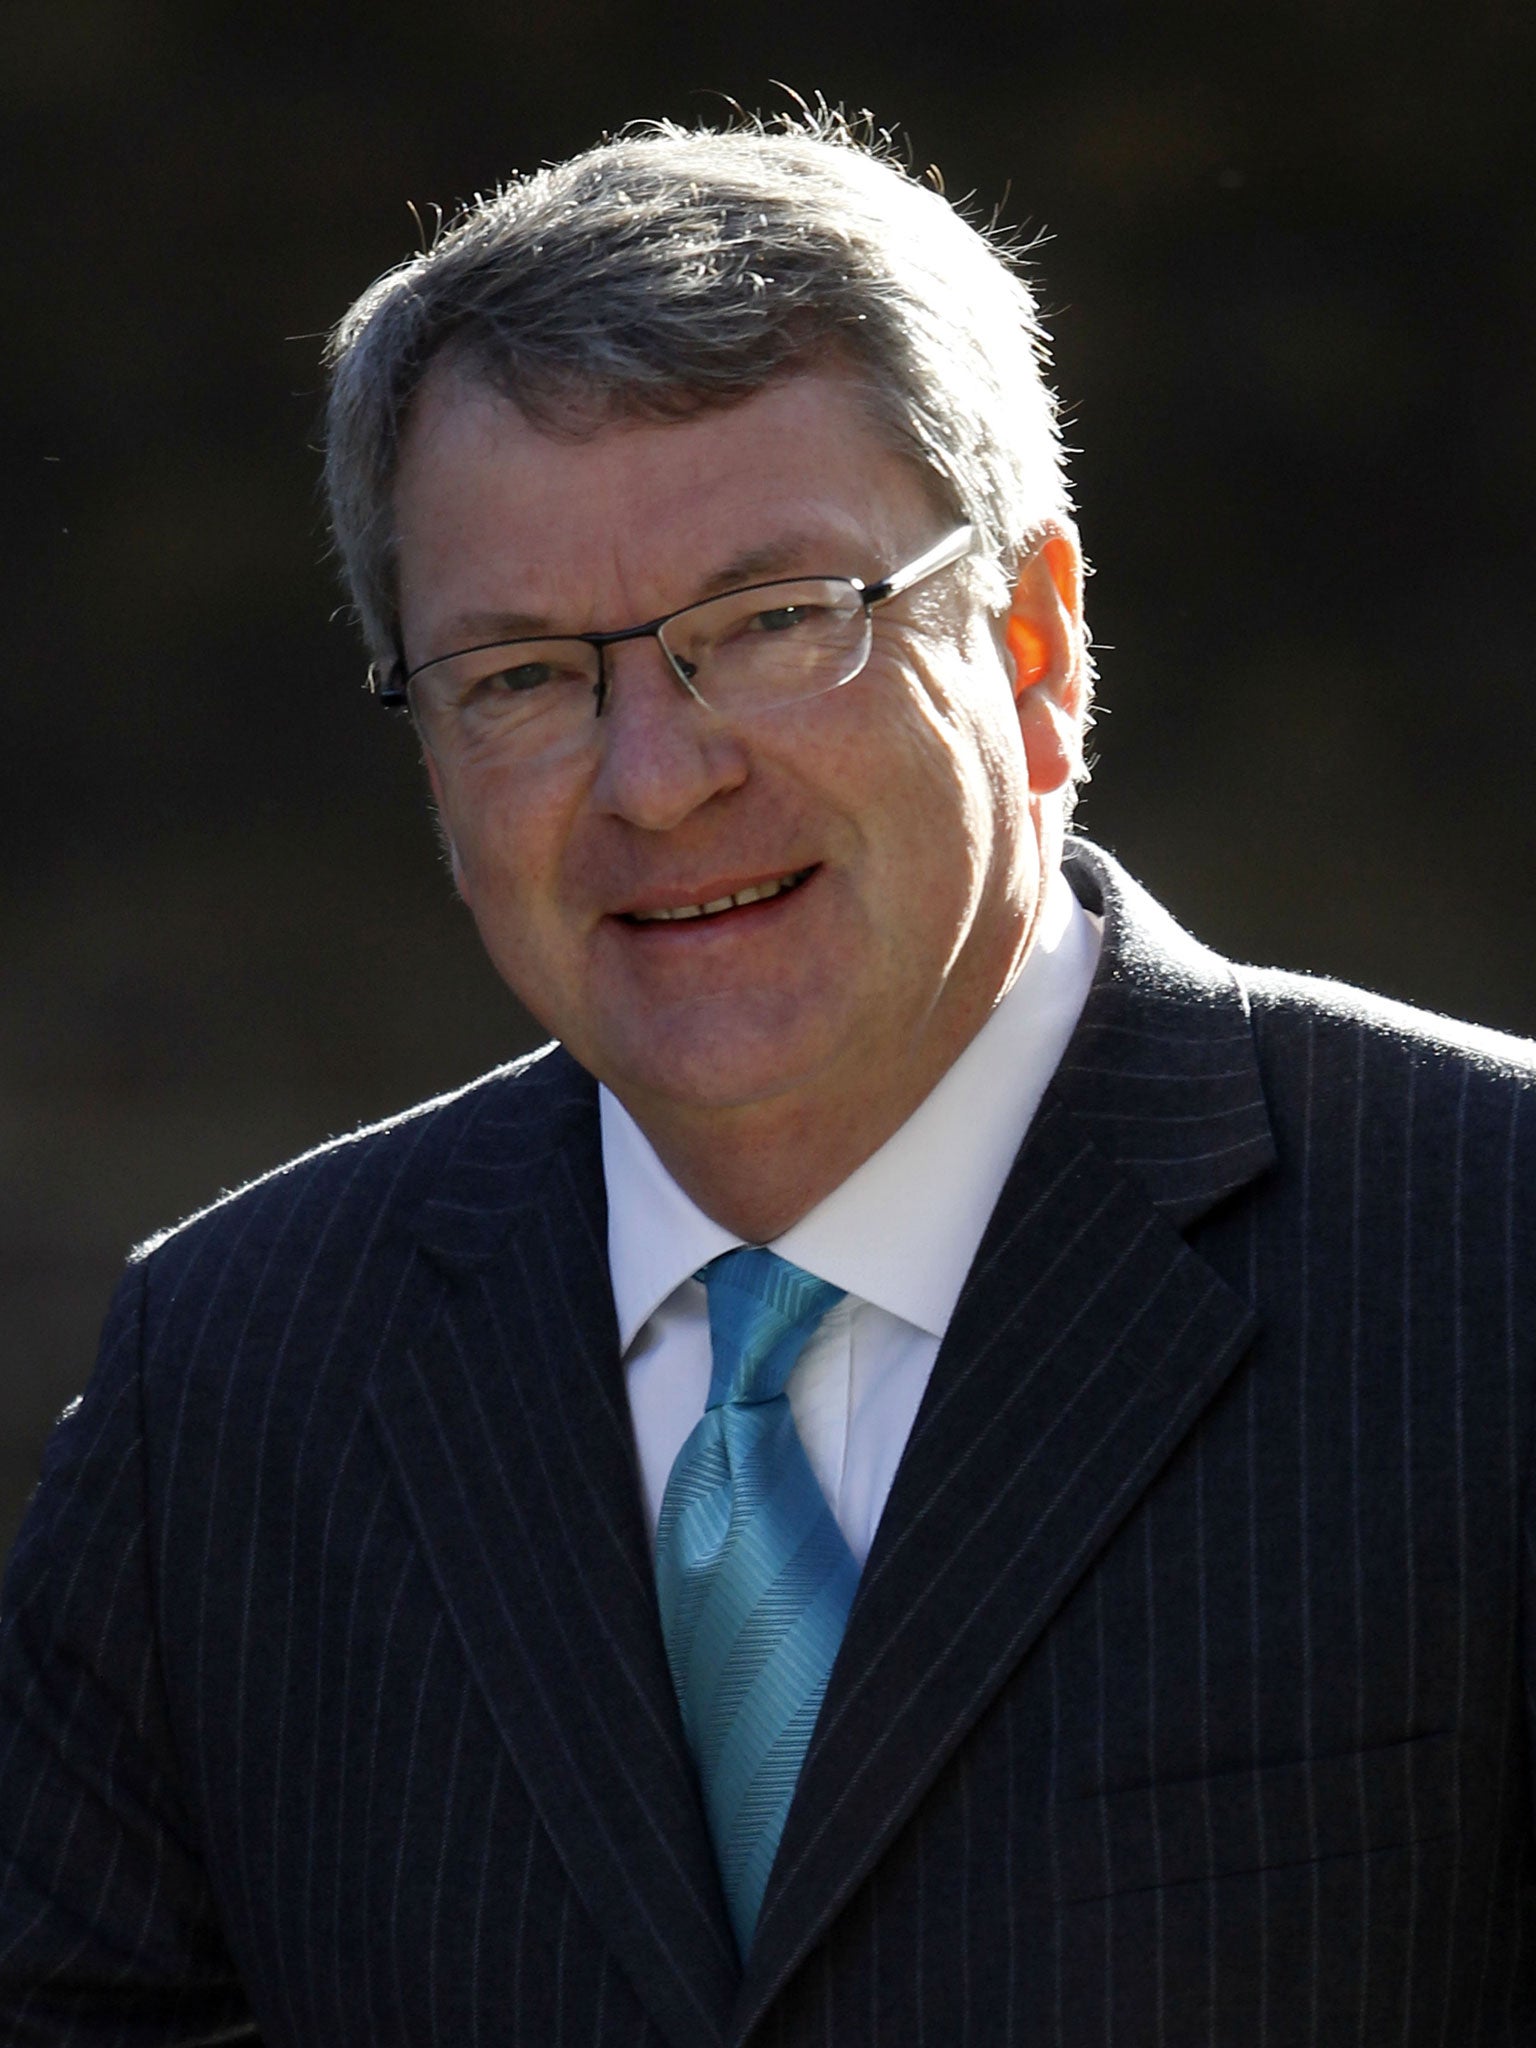 Lynton Crosby has told ministers to stop announcing minor policies which distract from the party's core messages